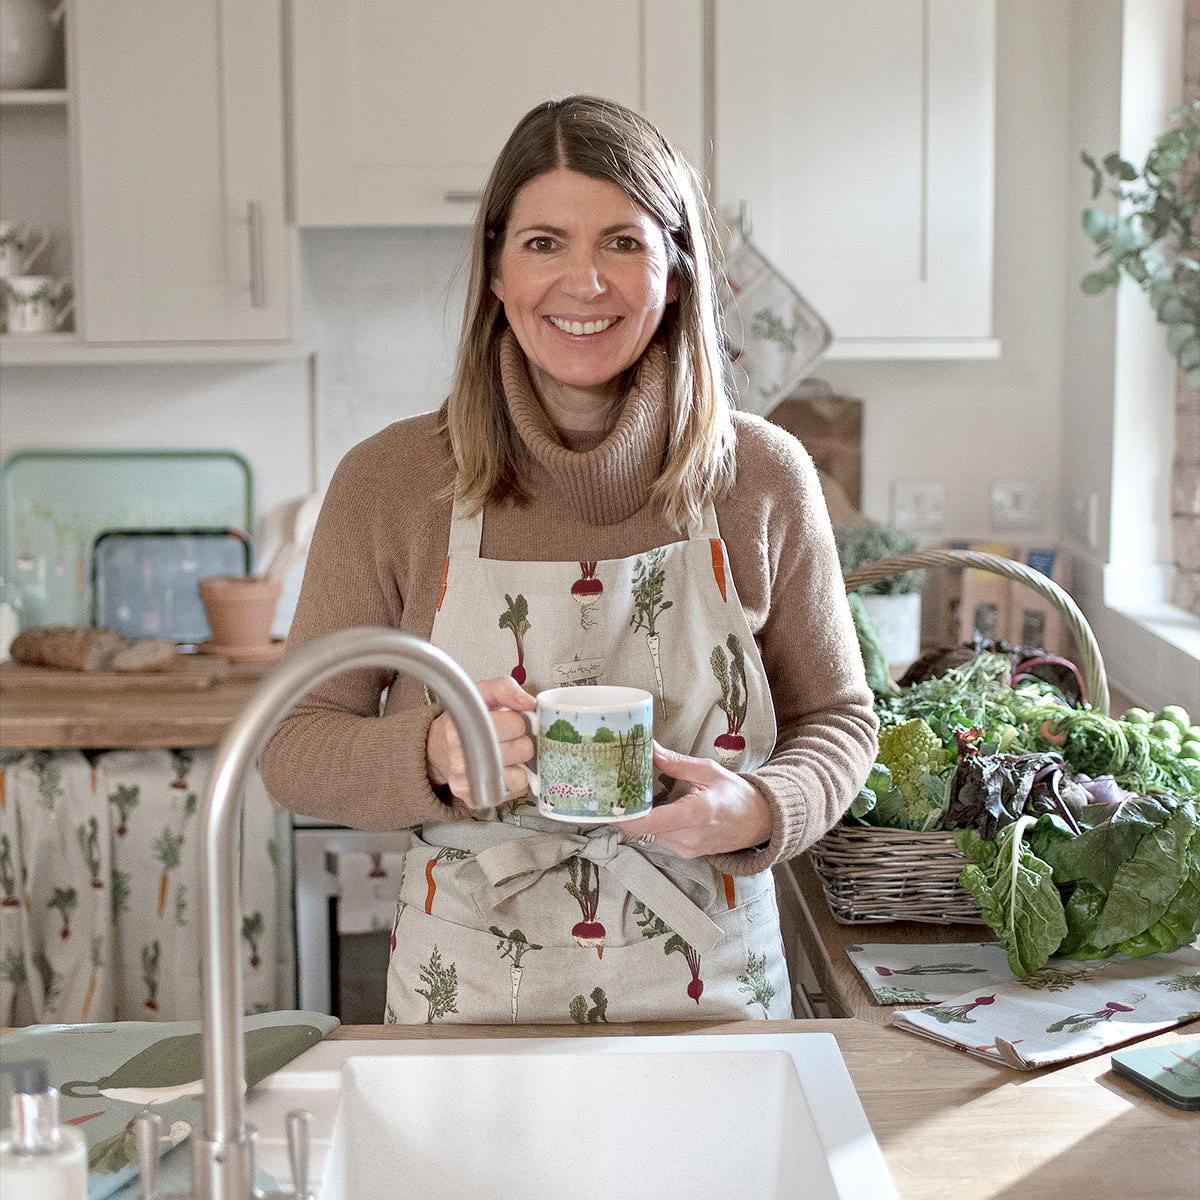 The Kitchen Garden Mug and Adult Apron by Sophie Allport